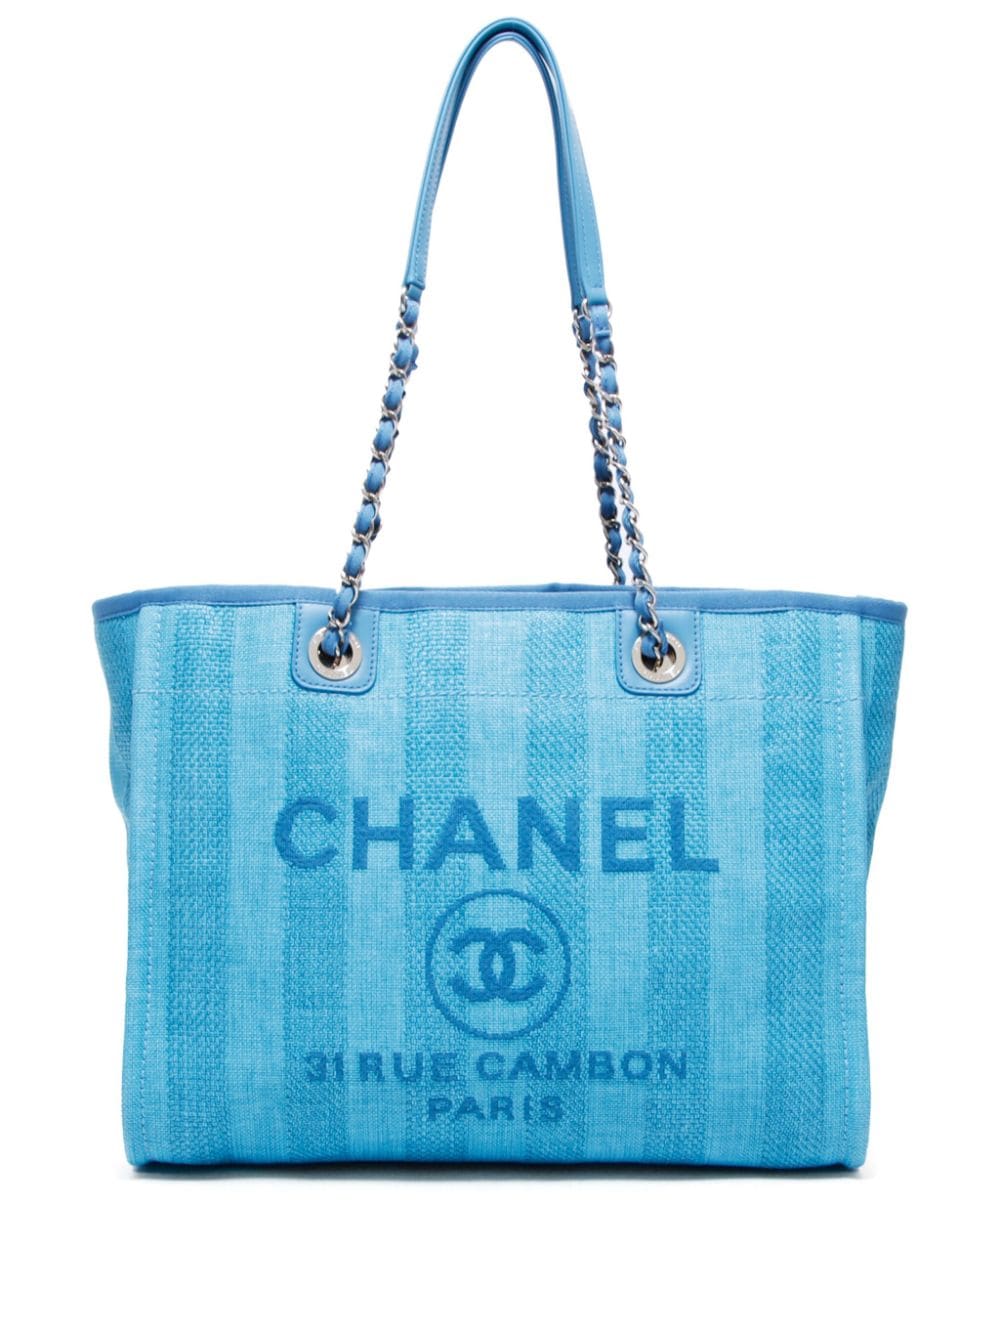 Pre-owned Chanel 2020 Deauville Mm Tote Bag In Blue